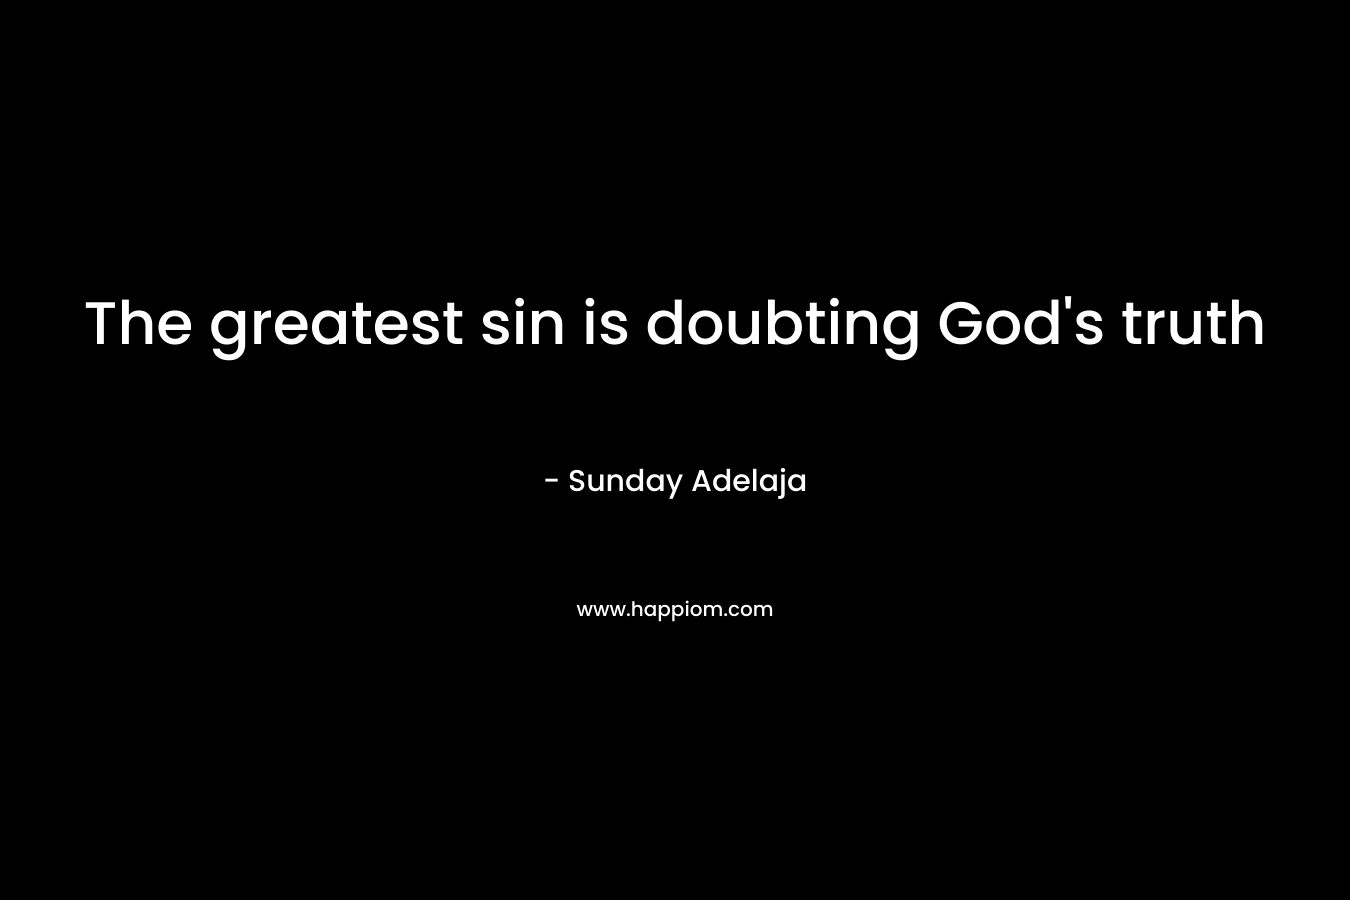 The greatest sin is doubting God's truth